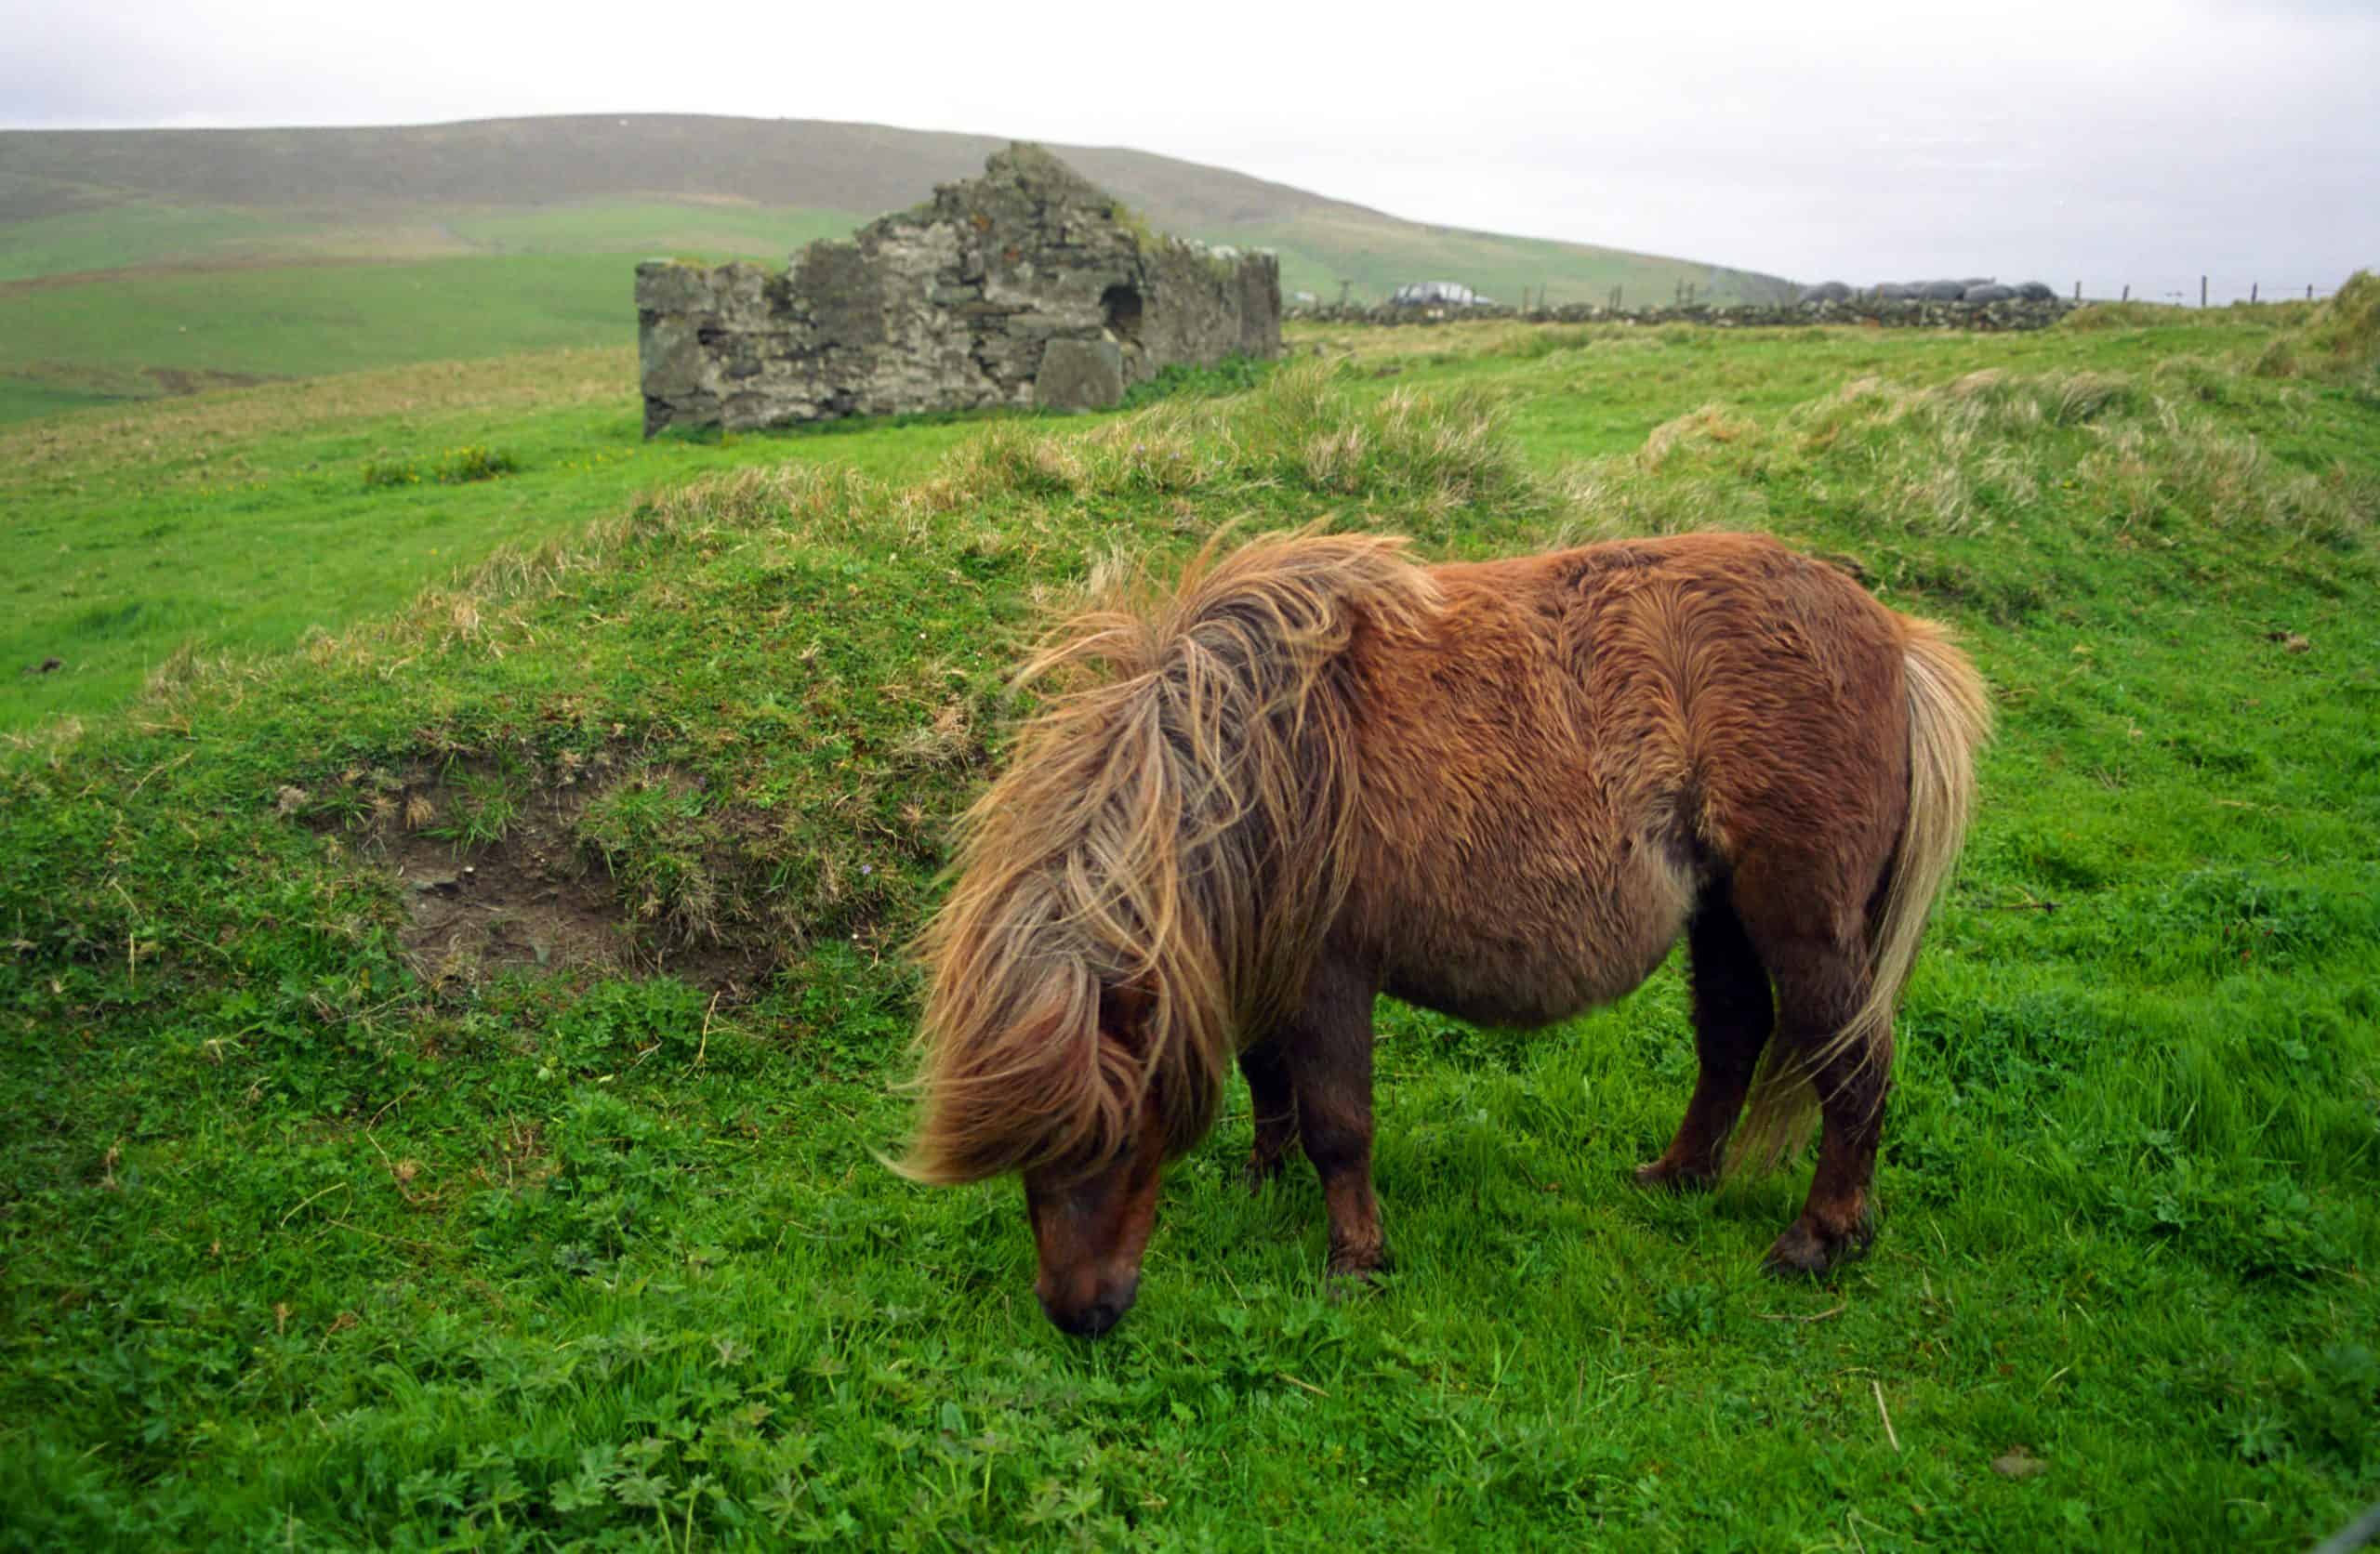 Shetland pony is a speceila species of pony horses, endemic to the Shetland Islands.